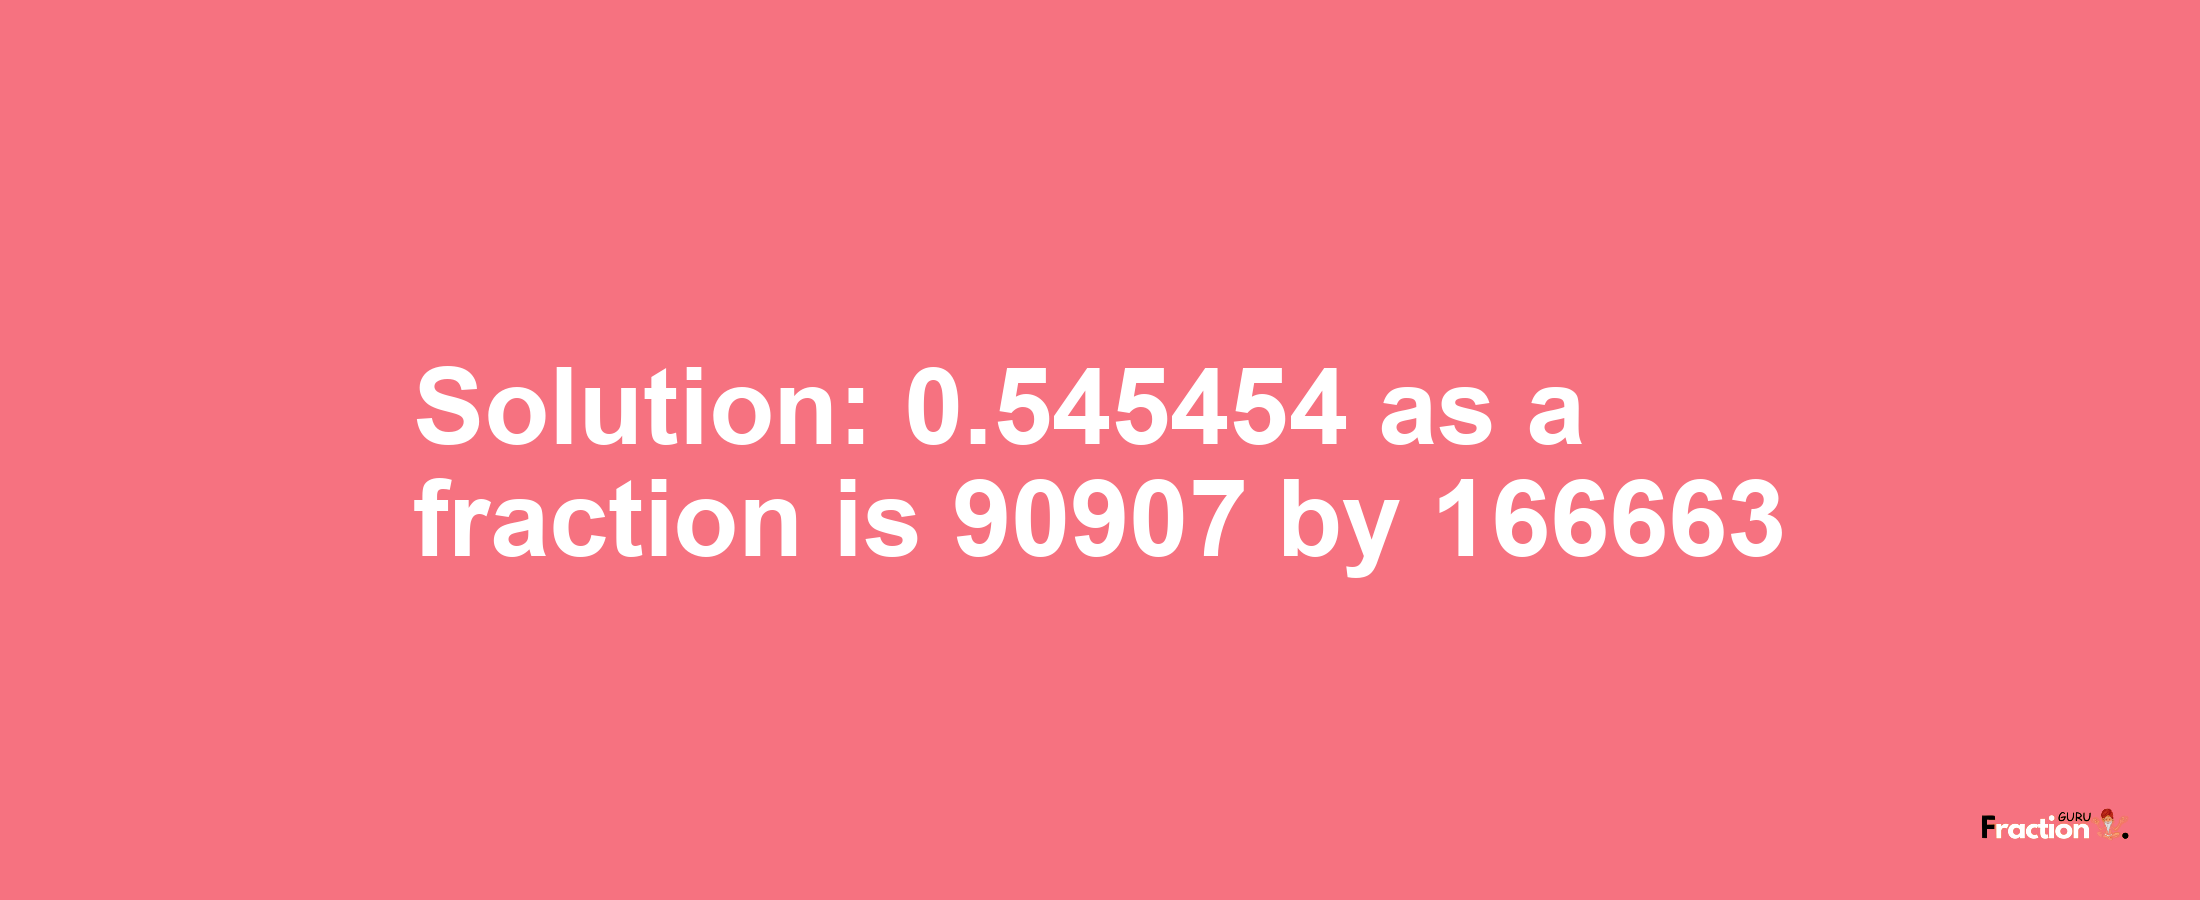 Solution:0.545454 as a fraction is 90907/166663